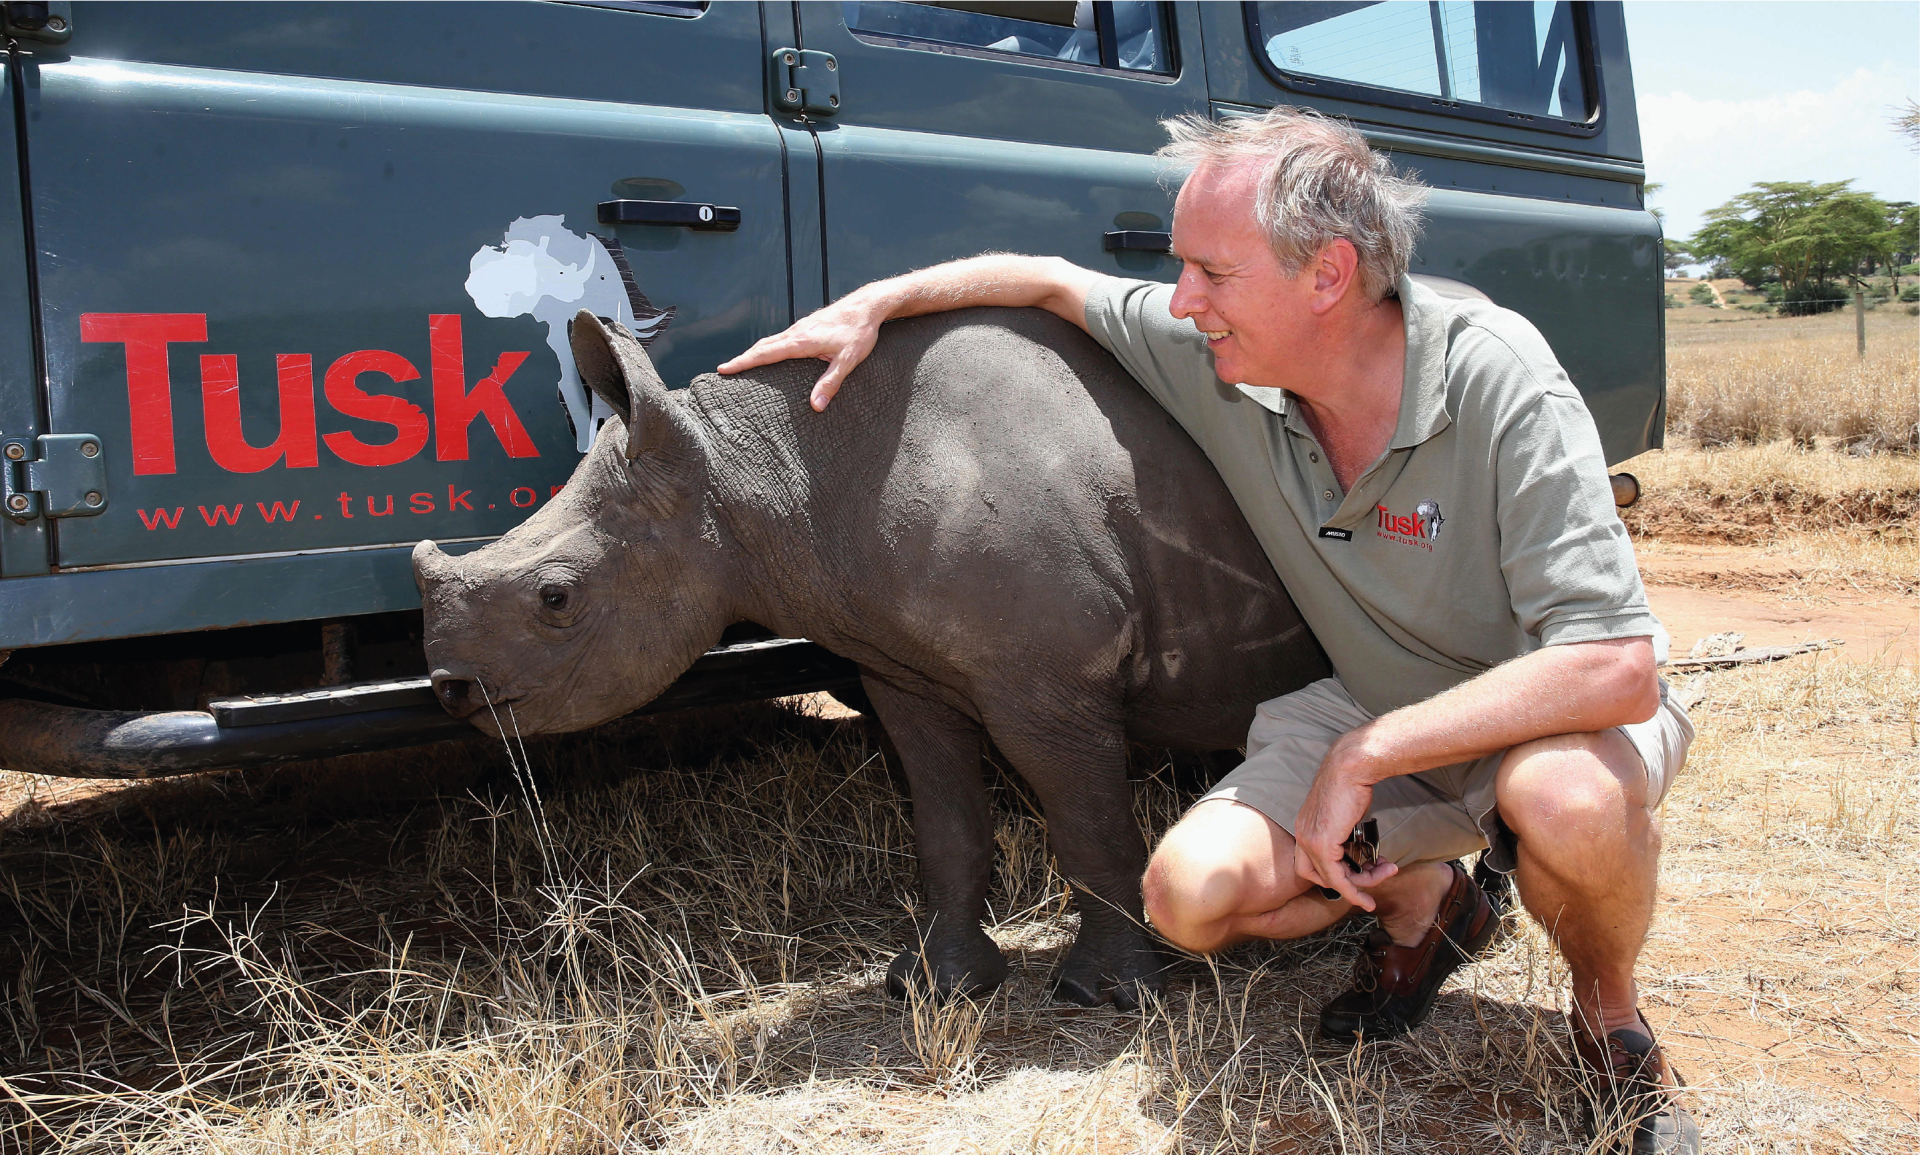 BlueRusk logo on the side of a Jeep, with a small rhino and man